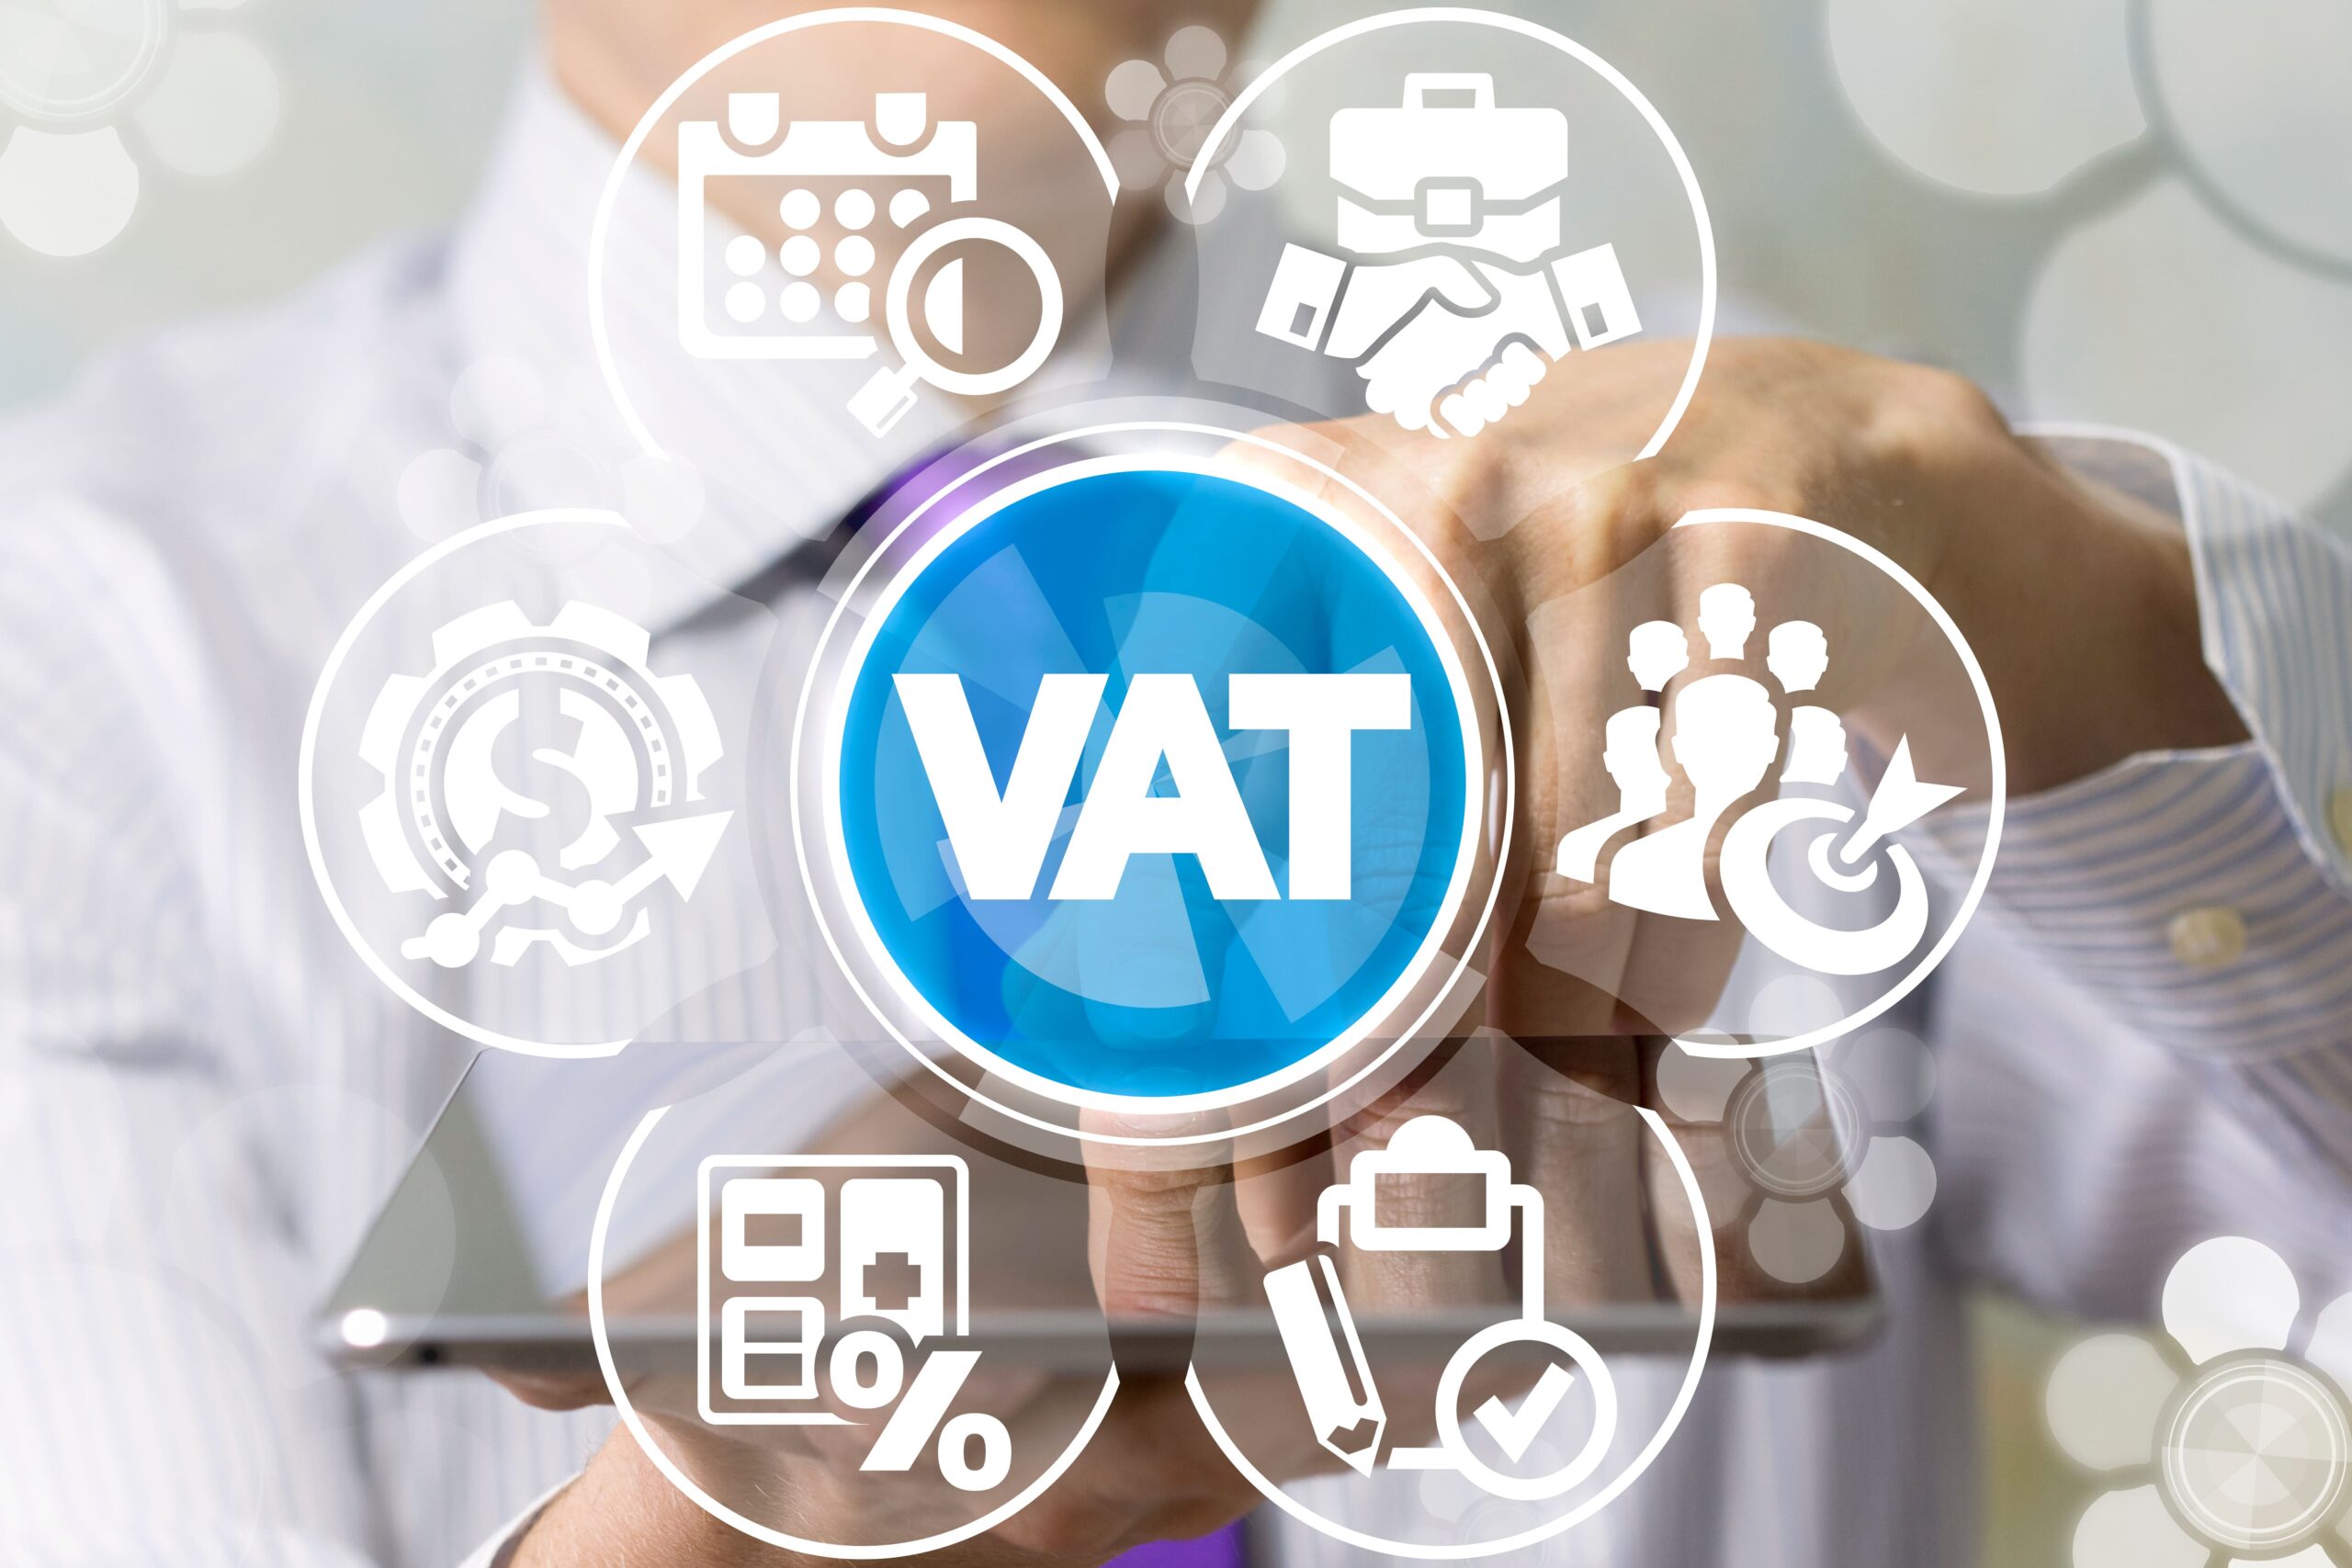 Compliance with VAT is becoming ever more complex. Investigations from HMRC can be intense